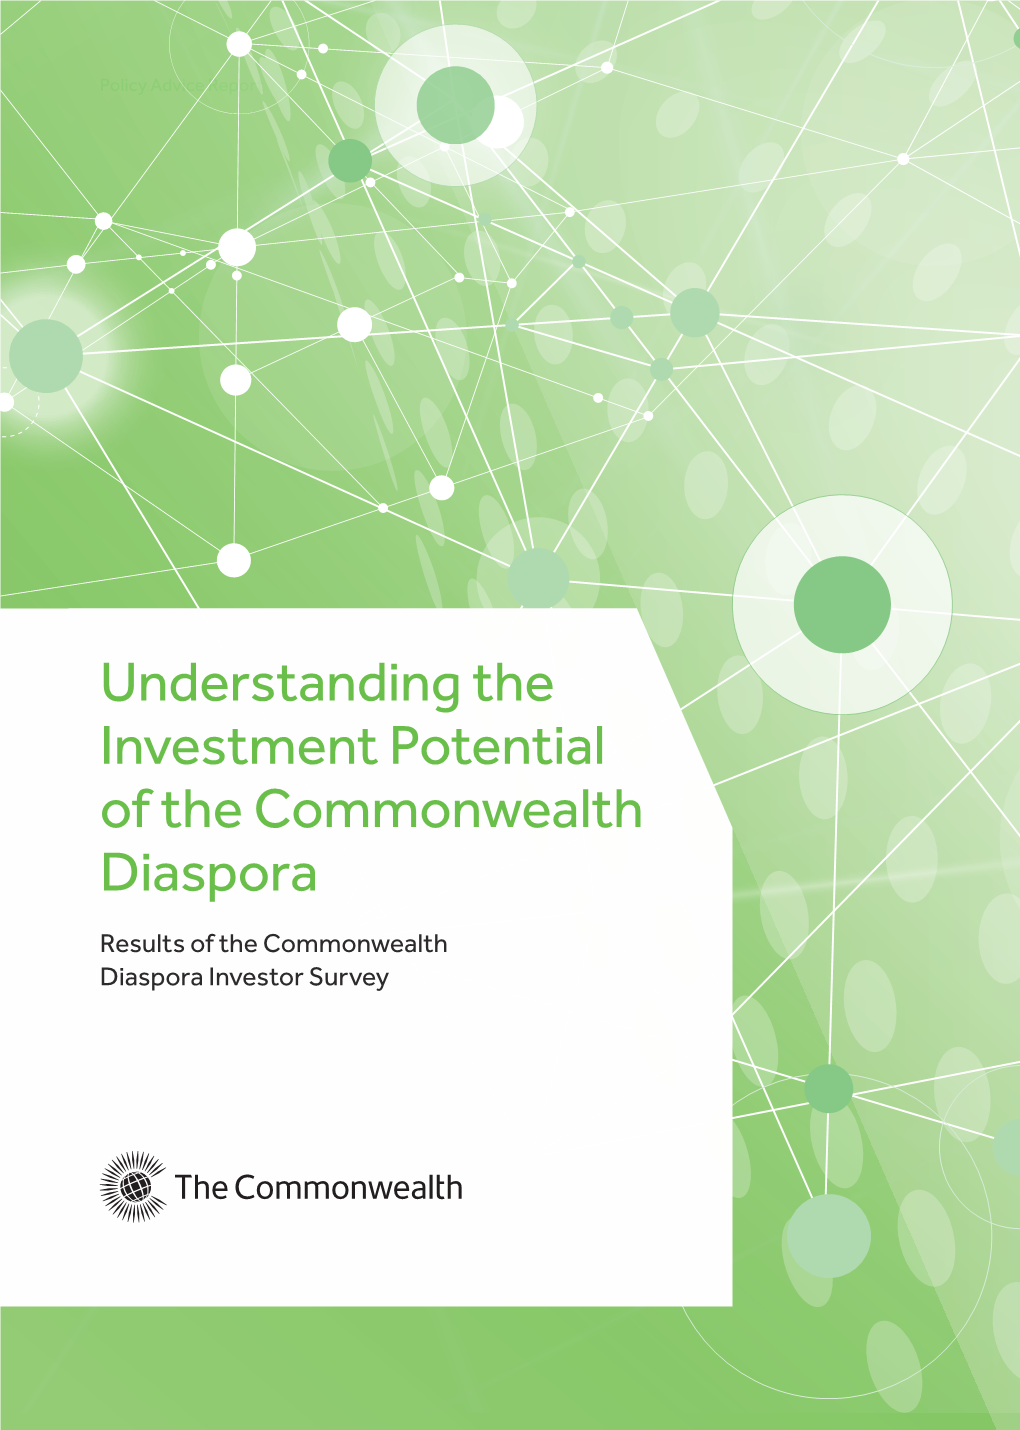 Understanding the Investment Potential of the Commonwealth Diaspora